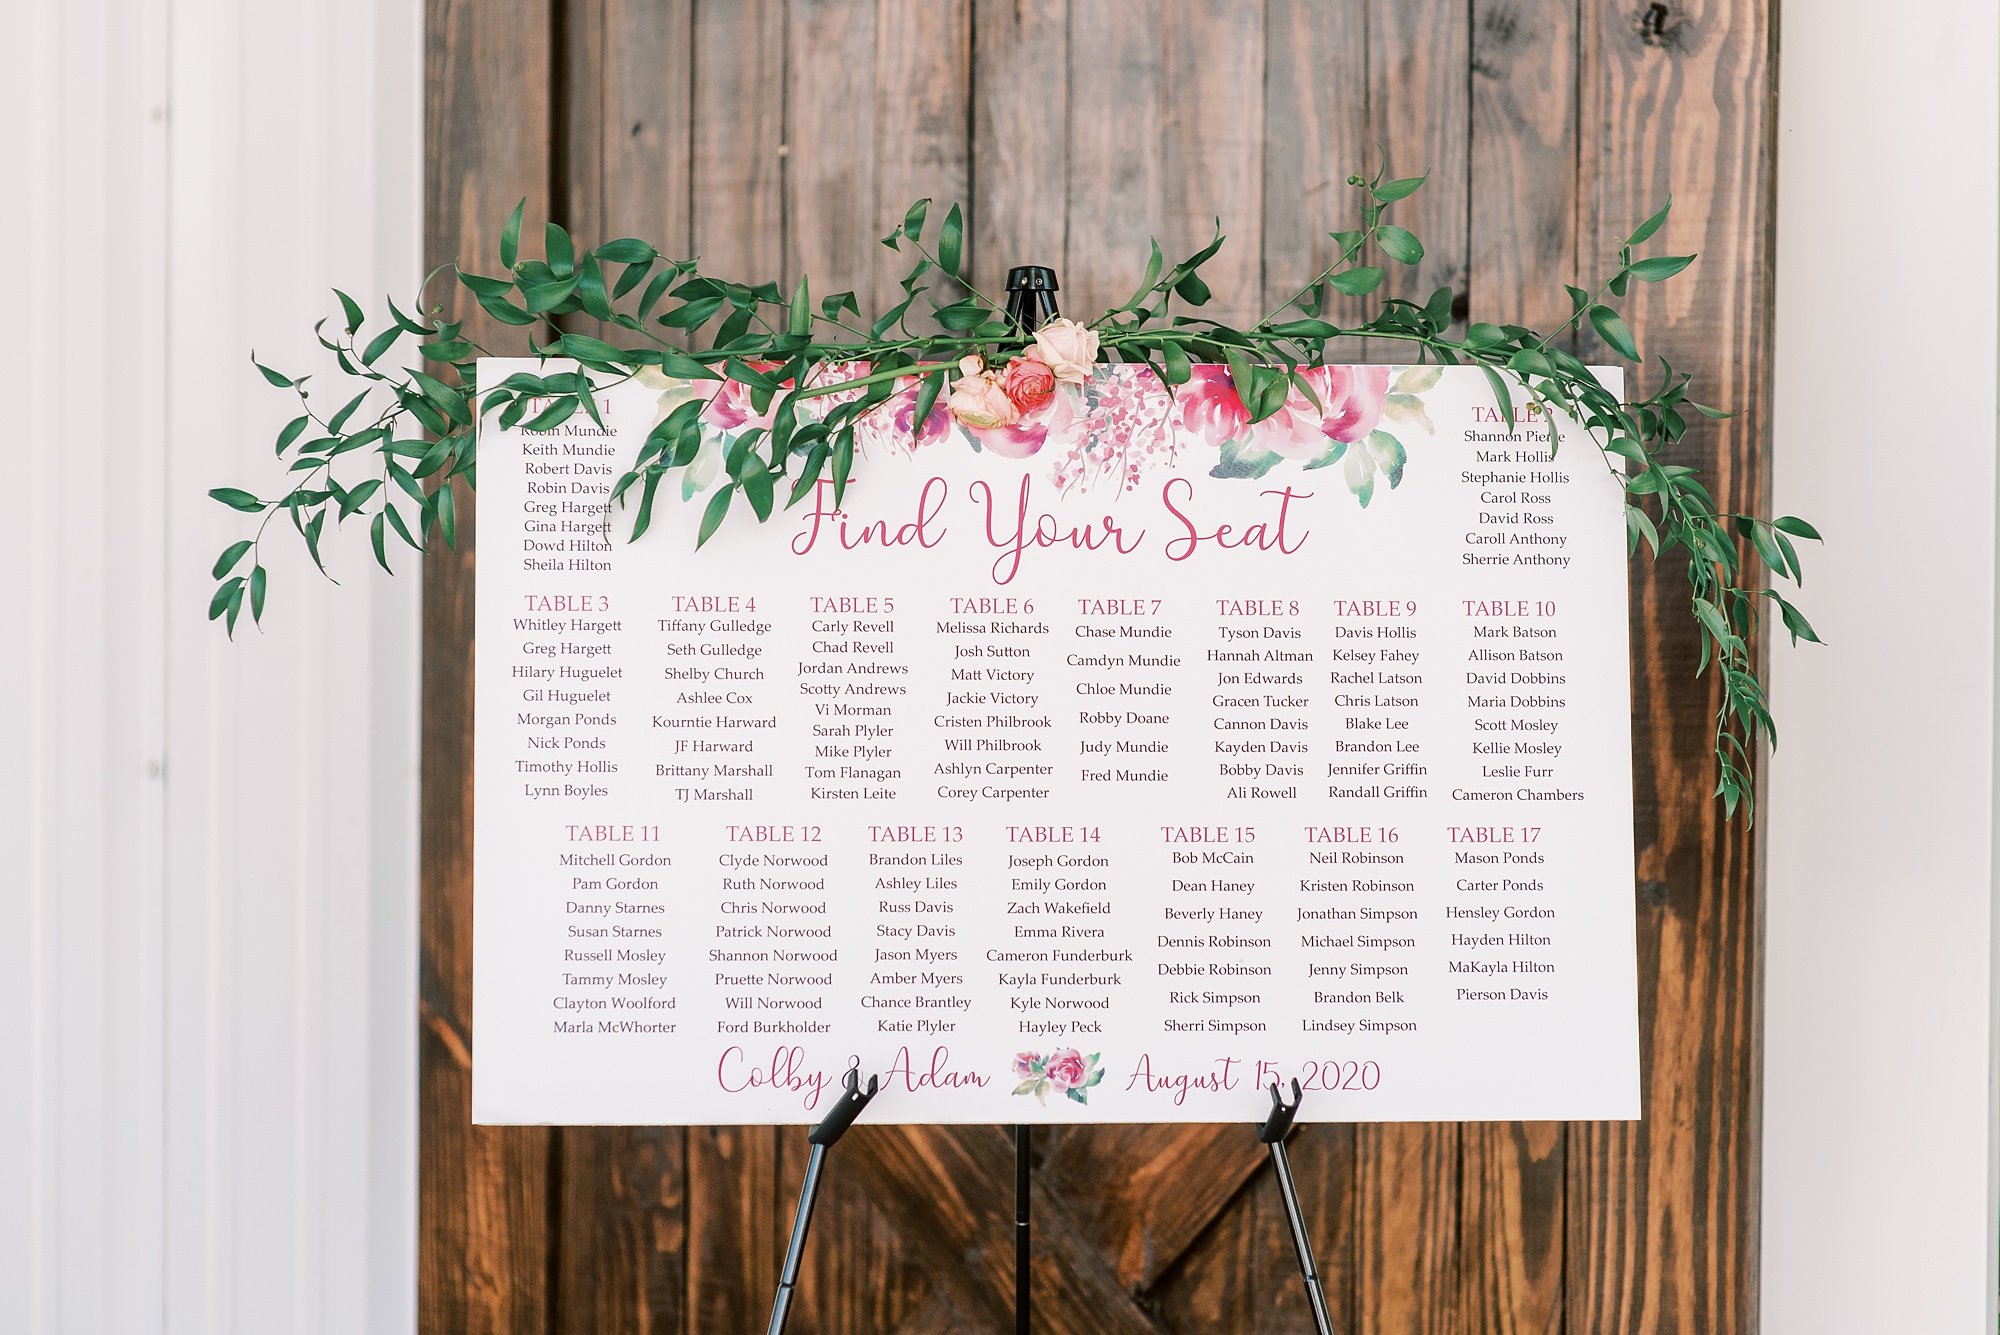 seating chart for Belle's Venue wedding reception